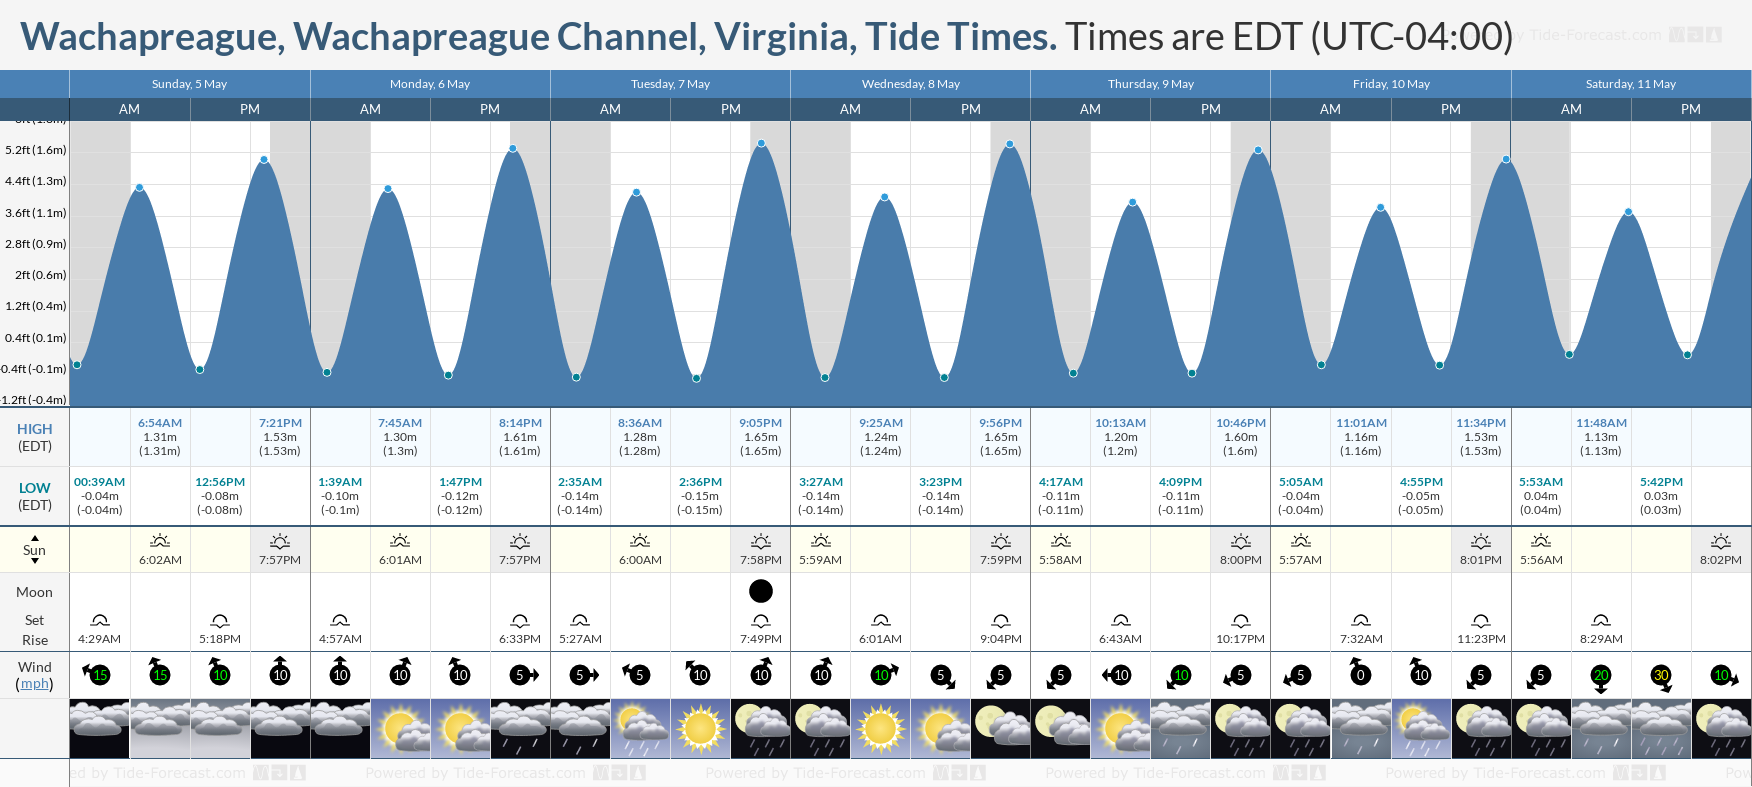 Wachapreague, Wachapreague Channel, Virginia Tide Chart including high and low tide tide times for the next 7 days